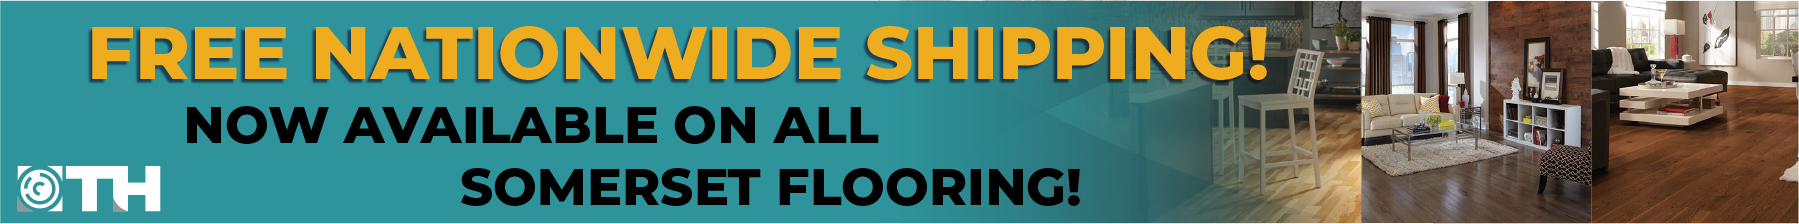 free nationwide shipping on all somerset flooring